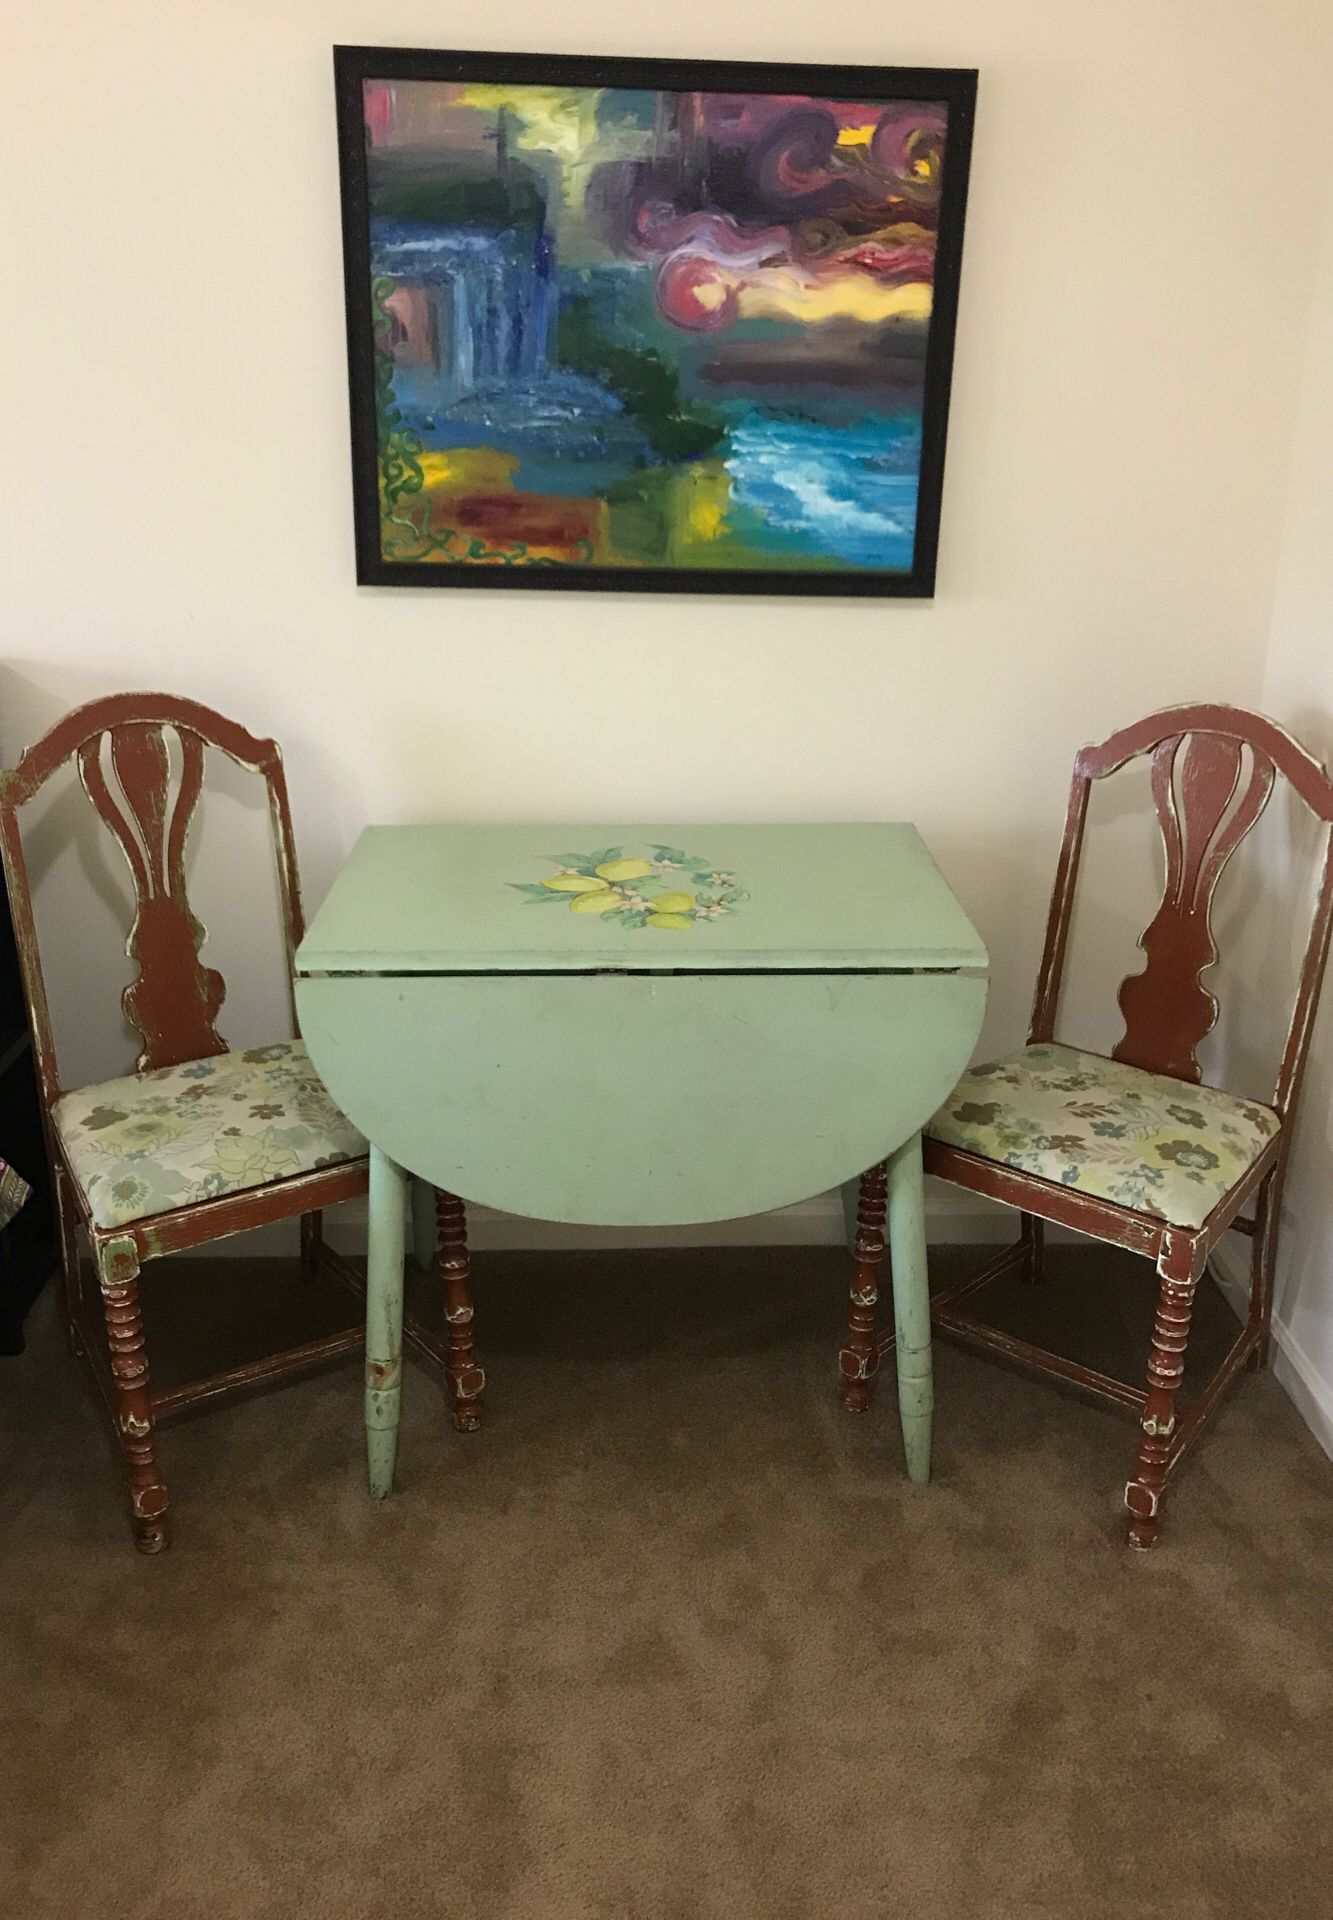 Rustic mini table with 2 chairs, hand painted